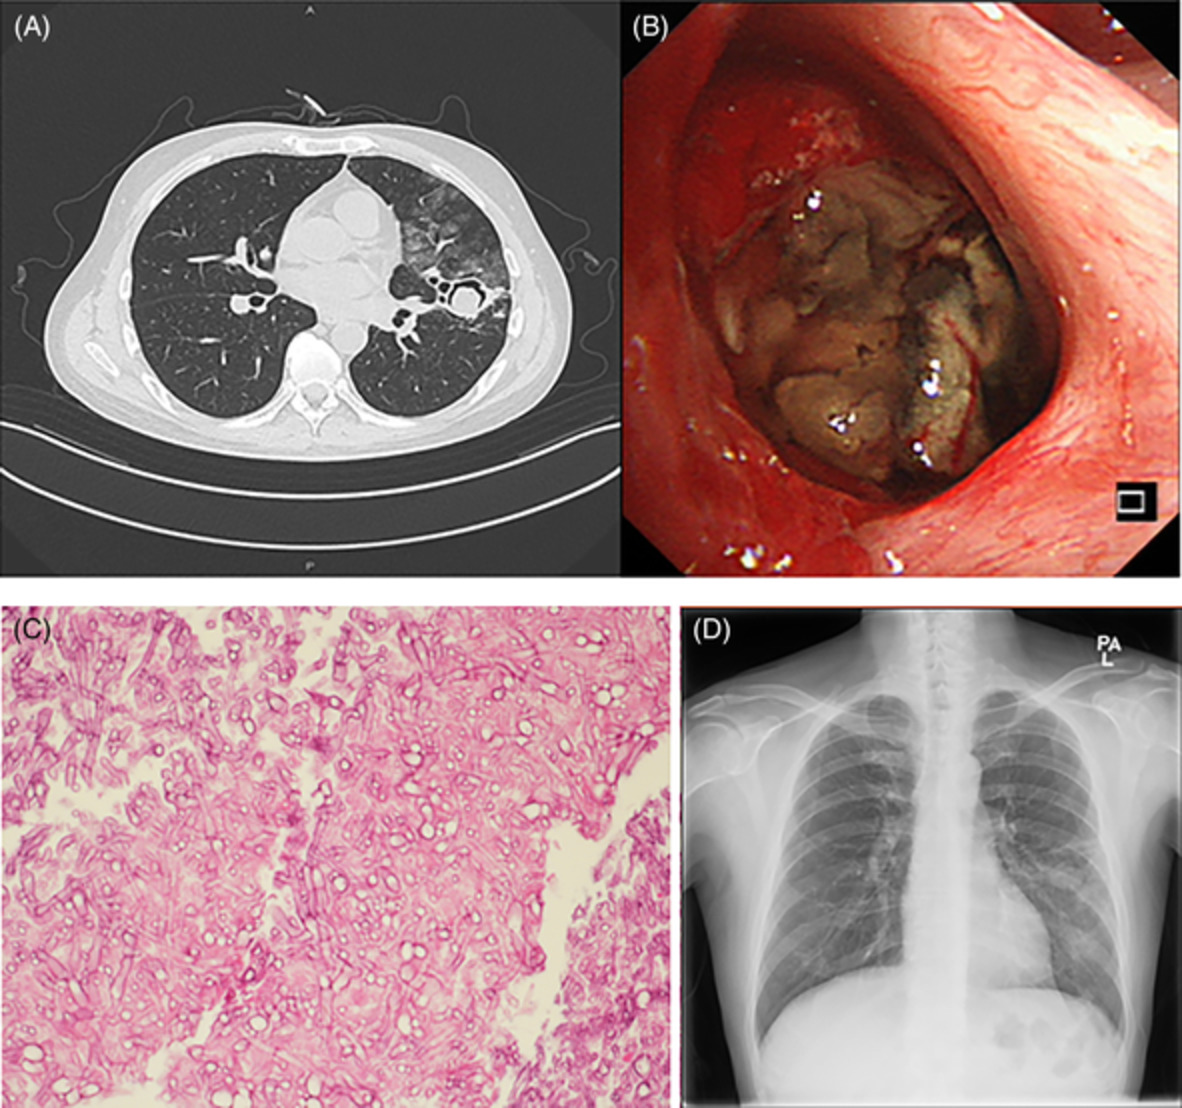 First reported case of late recurrence of pulmonary mucormycosis in a renal transplant recipient with poorly controlled diabetes mellitus